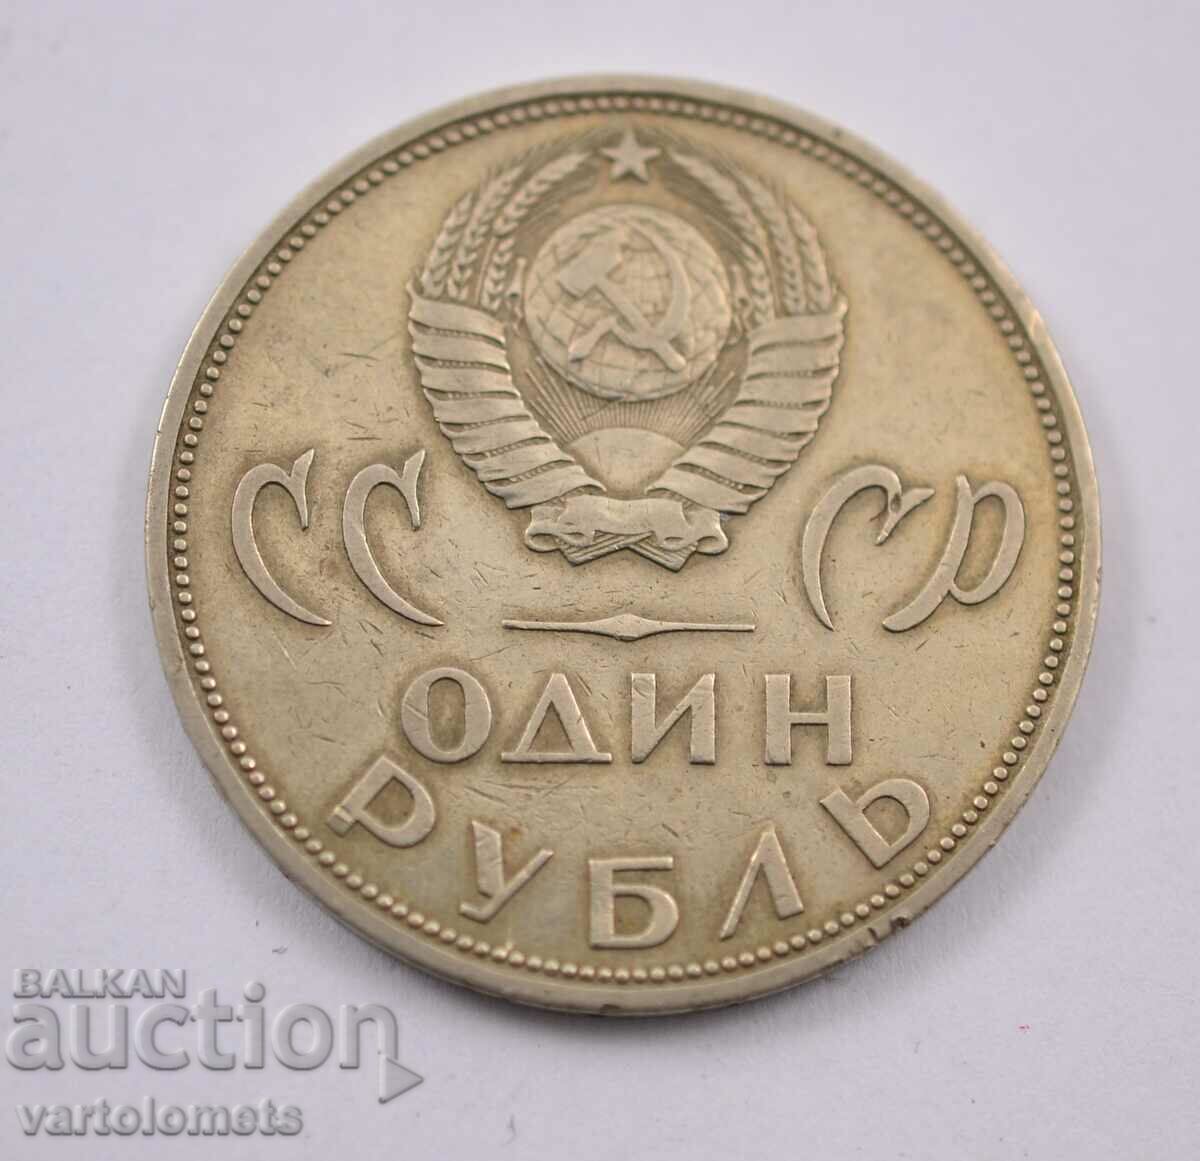 1 ruble, 1965 - USSR 20 years since the victory over Fascist Germany